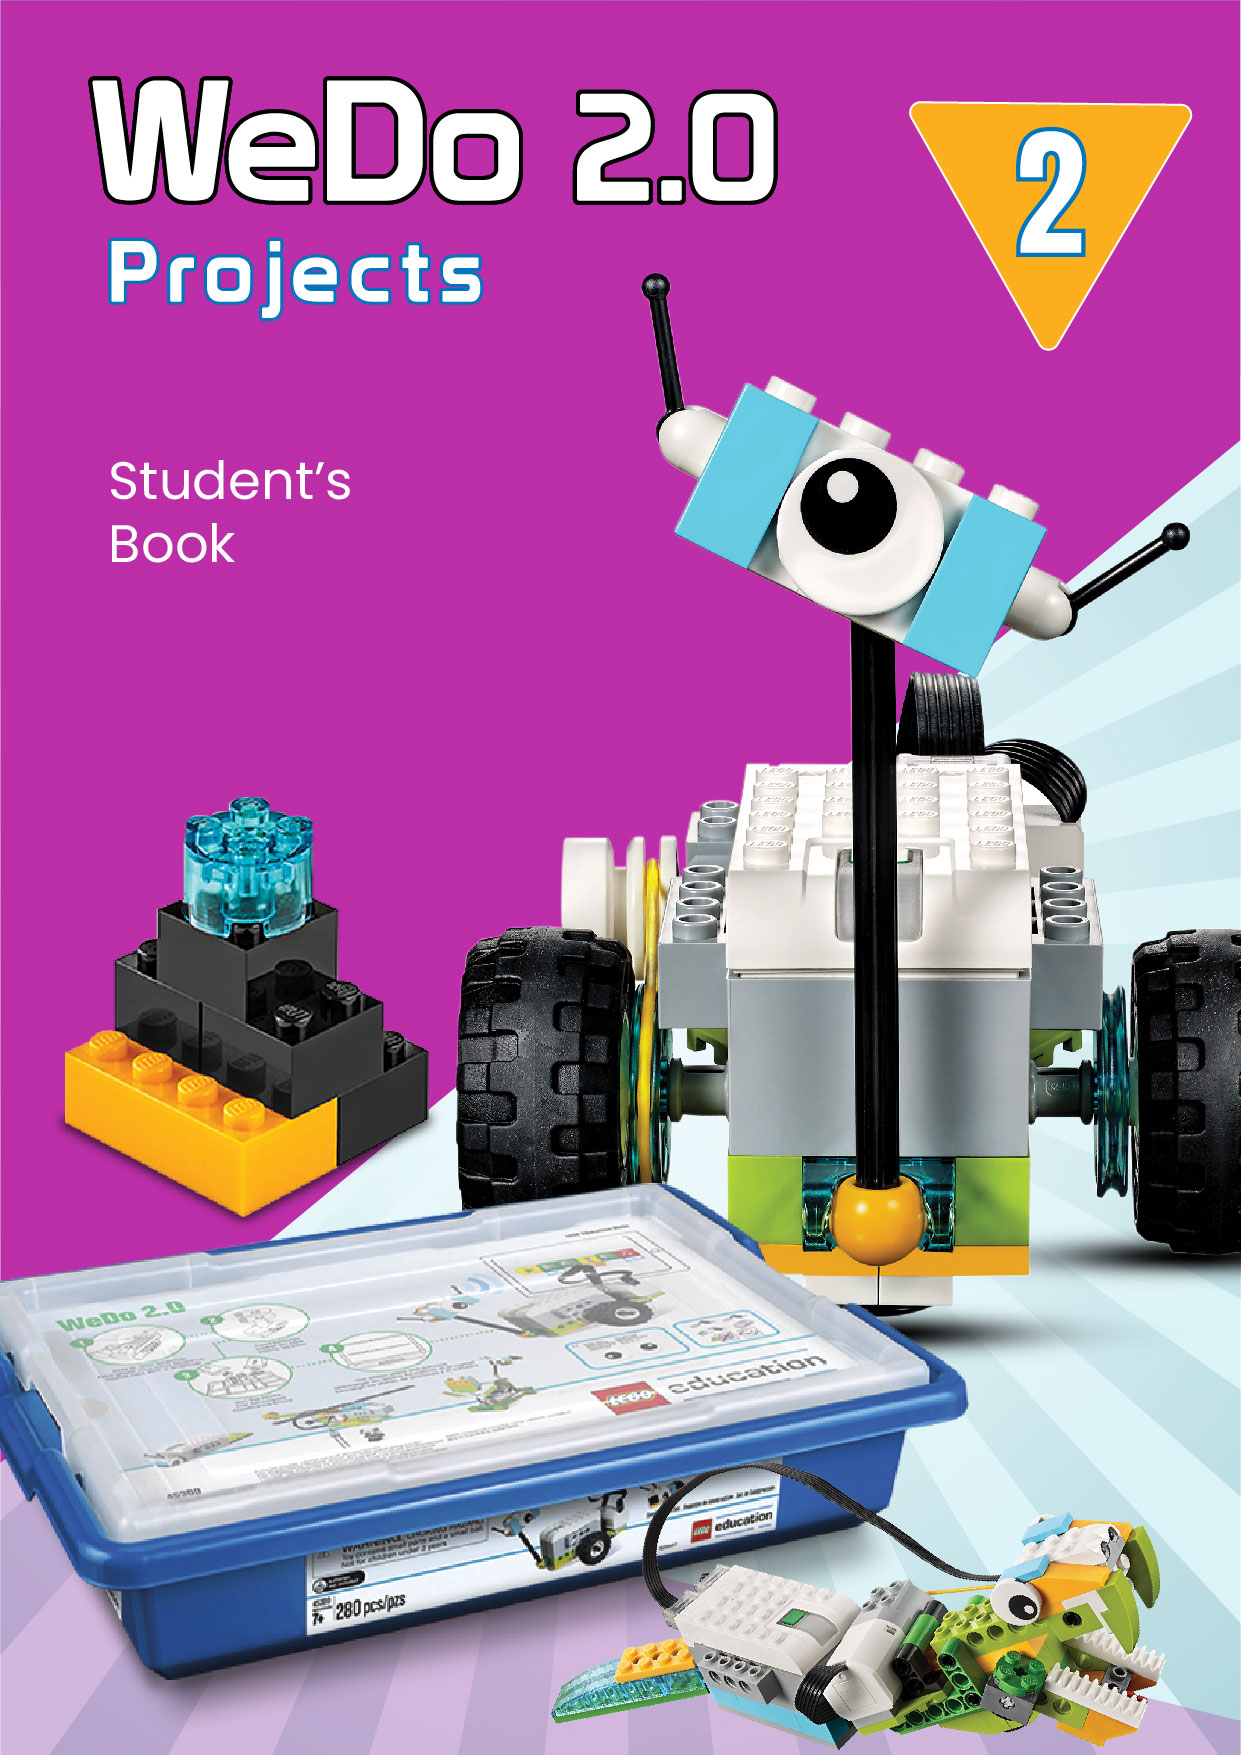 WeDo 2.0 Projects